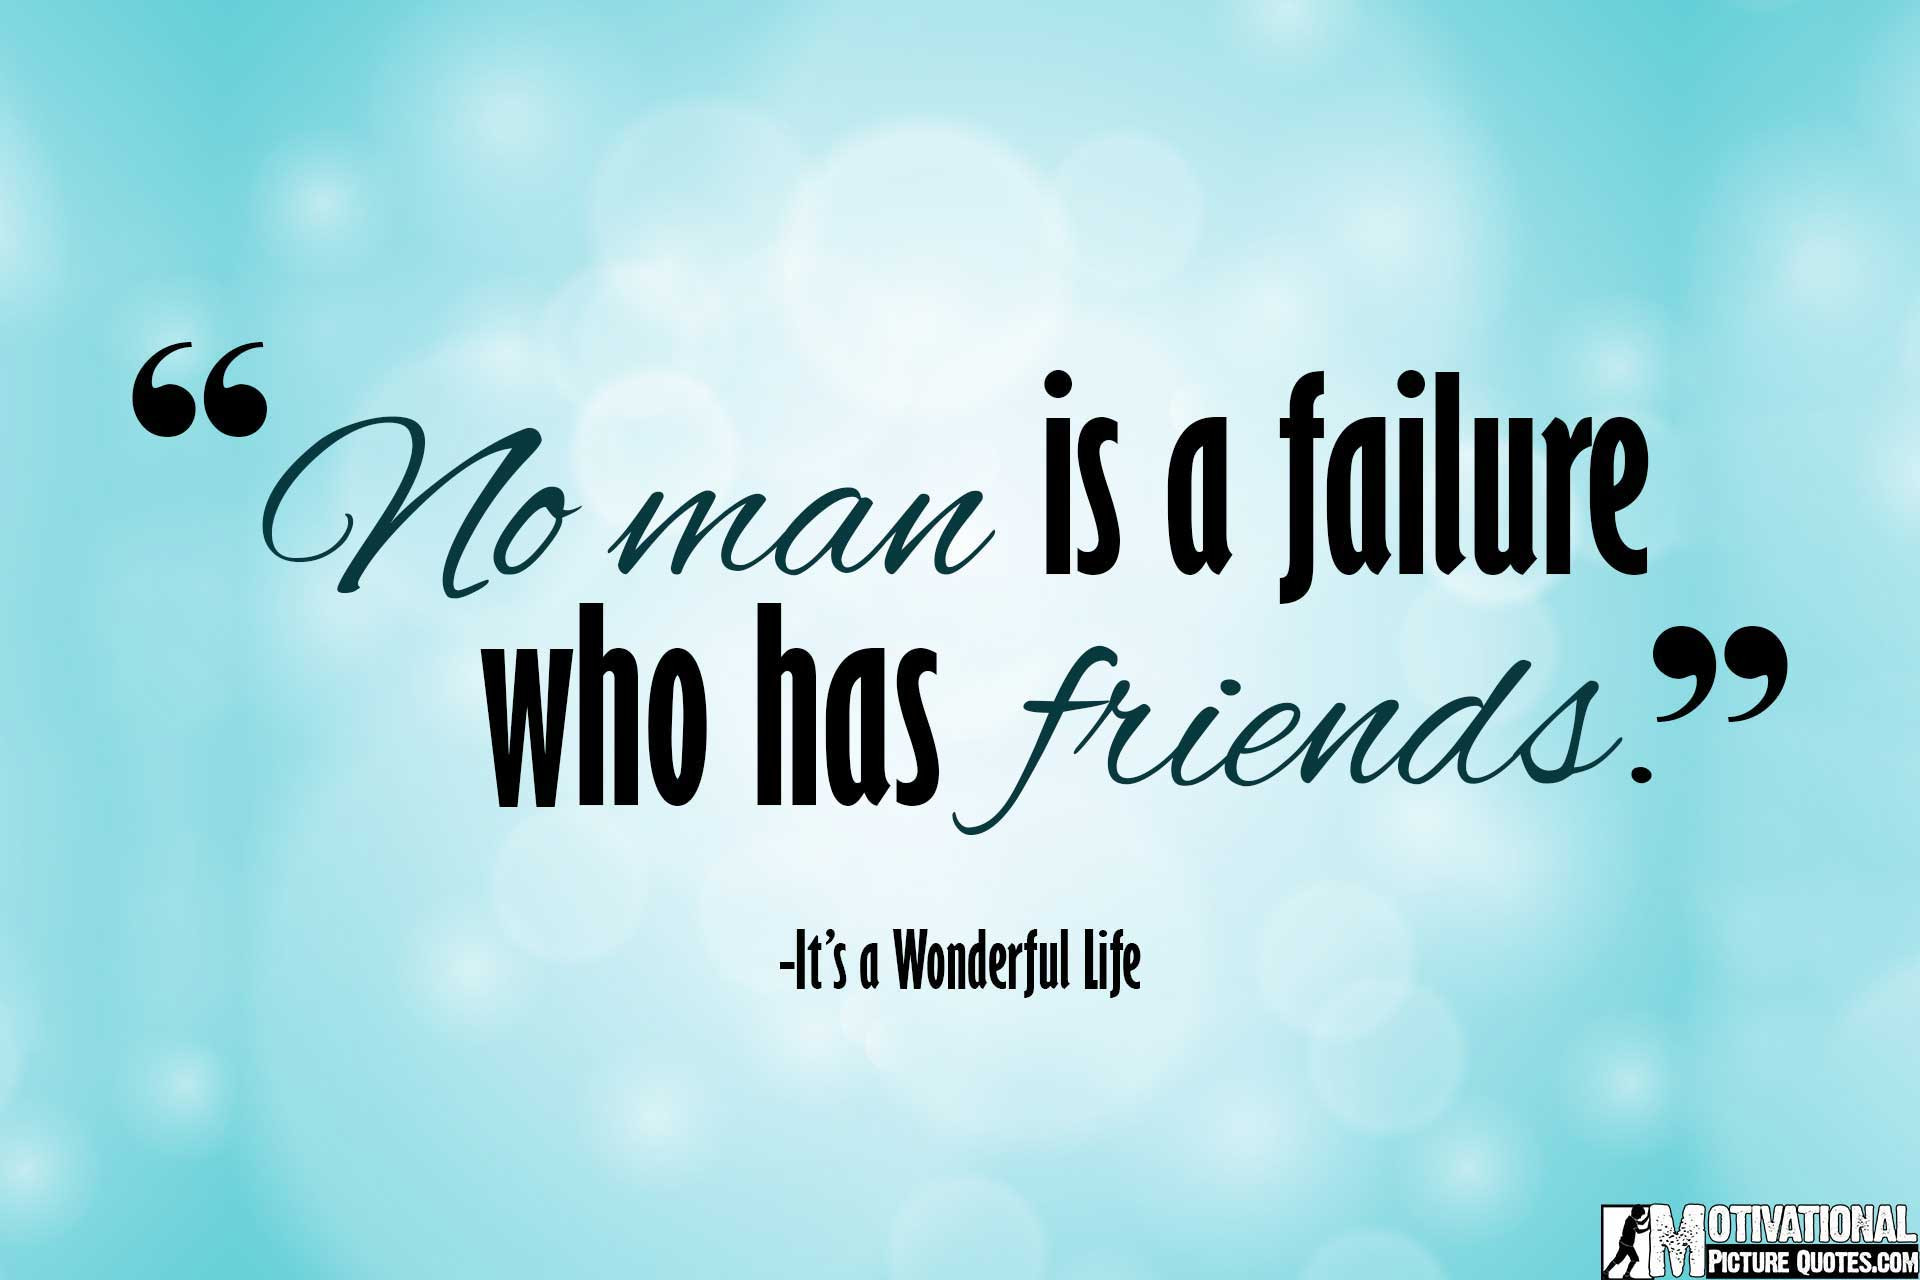 Pictures Quotes About Friendship
 25 Inspirational Friendship Quotes